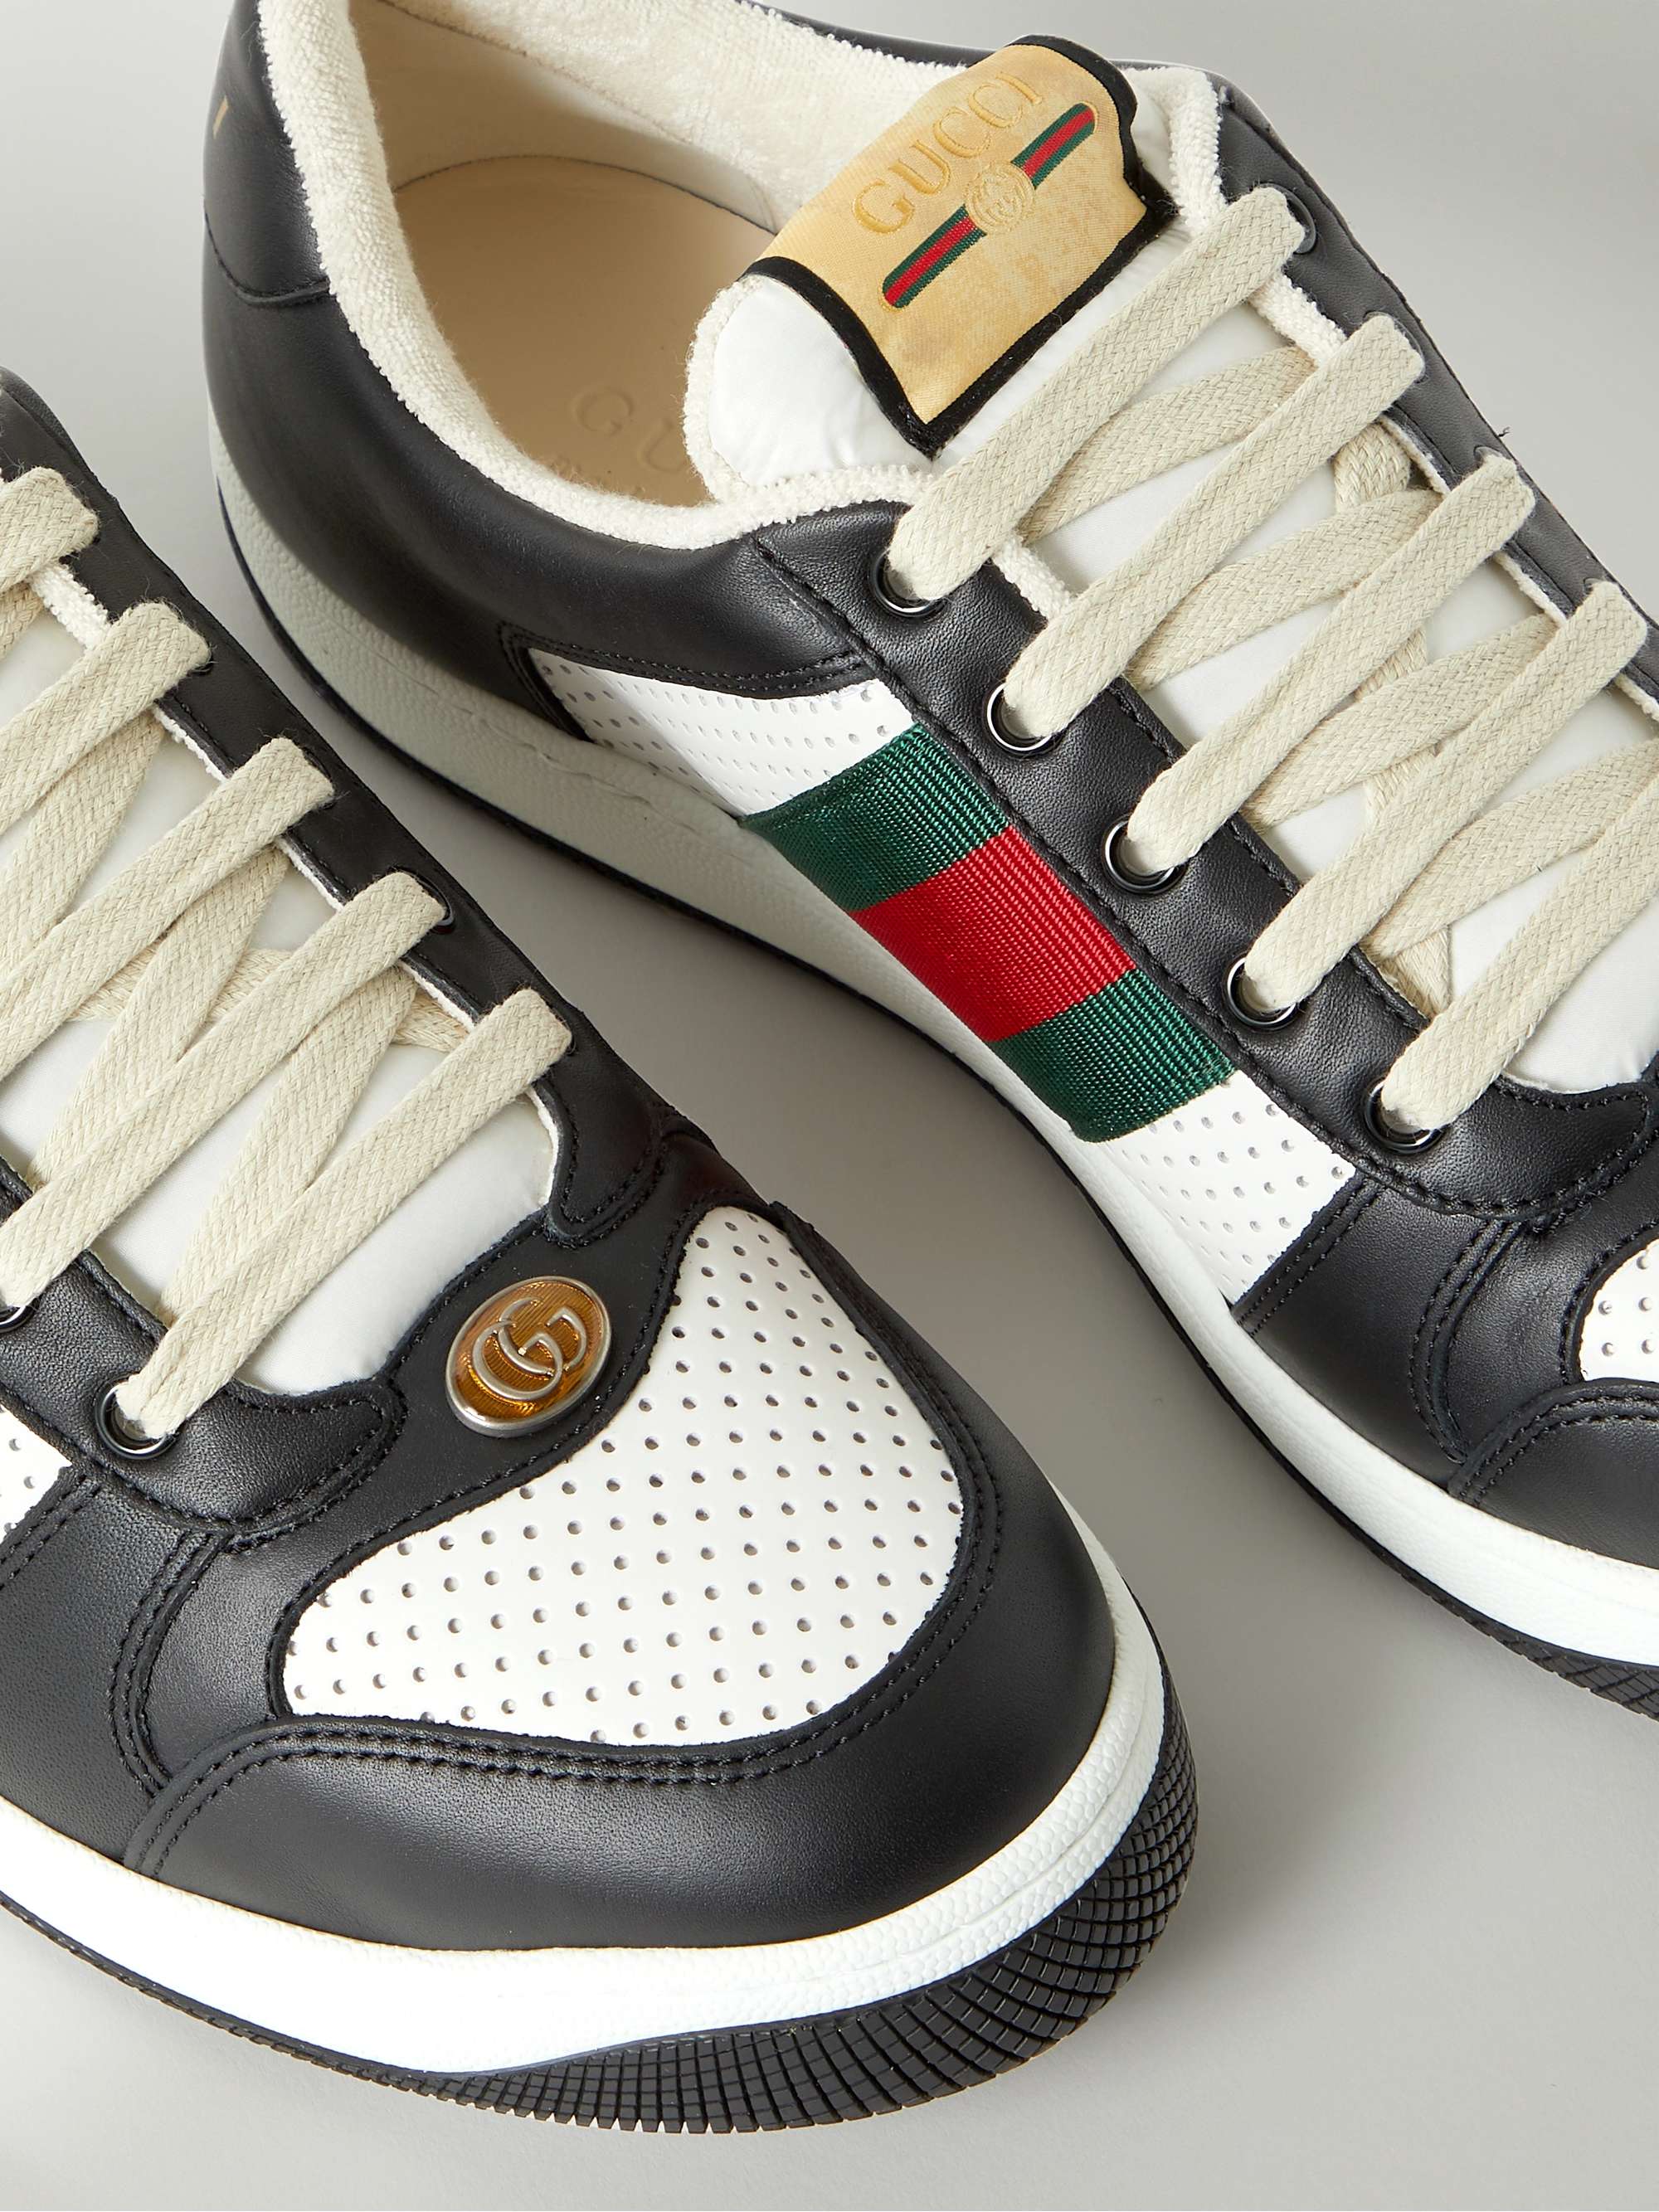 GUCCI Screener Webbing-Trimmed Perforated Leather Sneakers